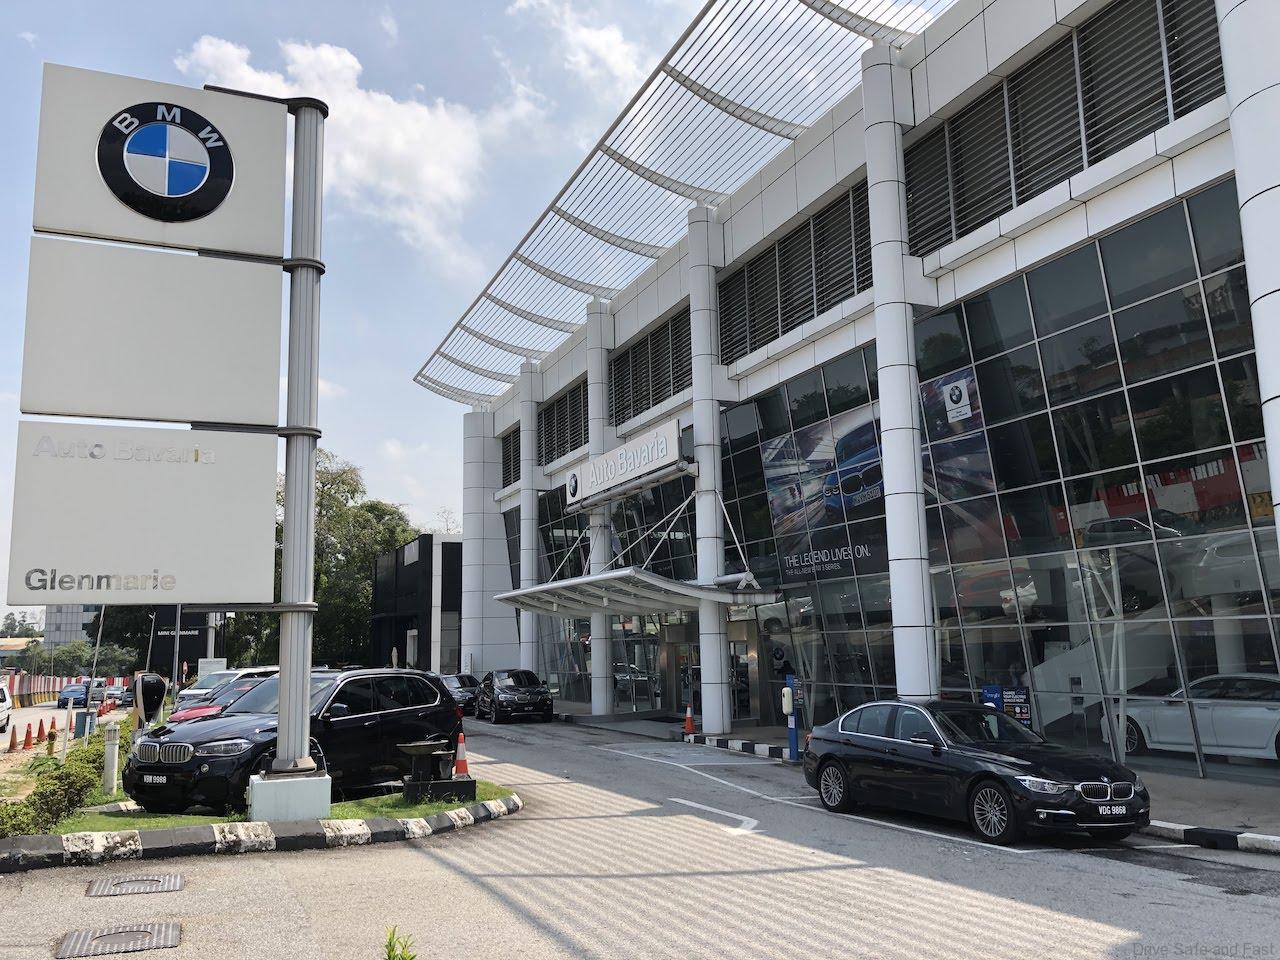 Auto Bavaria Glenmarie Is Moving Out After 20 Years A New Place